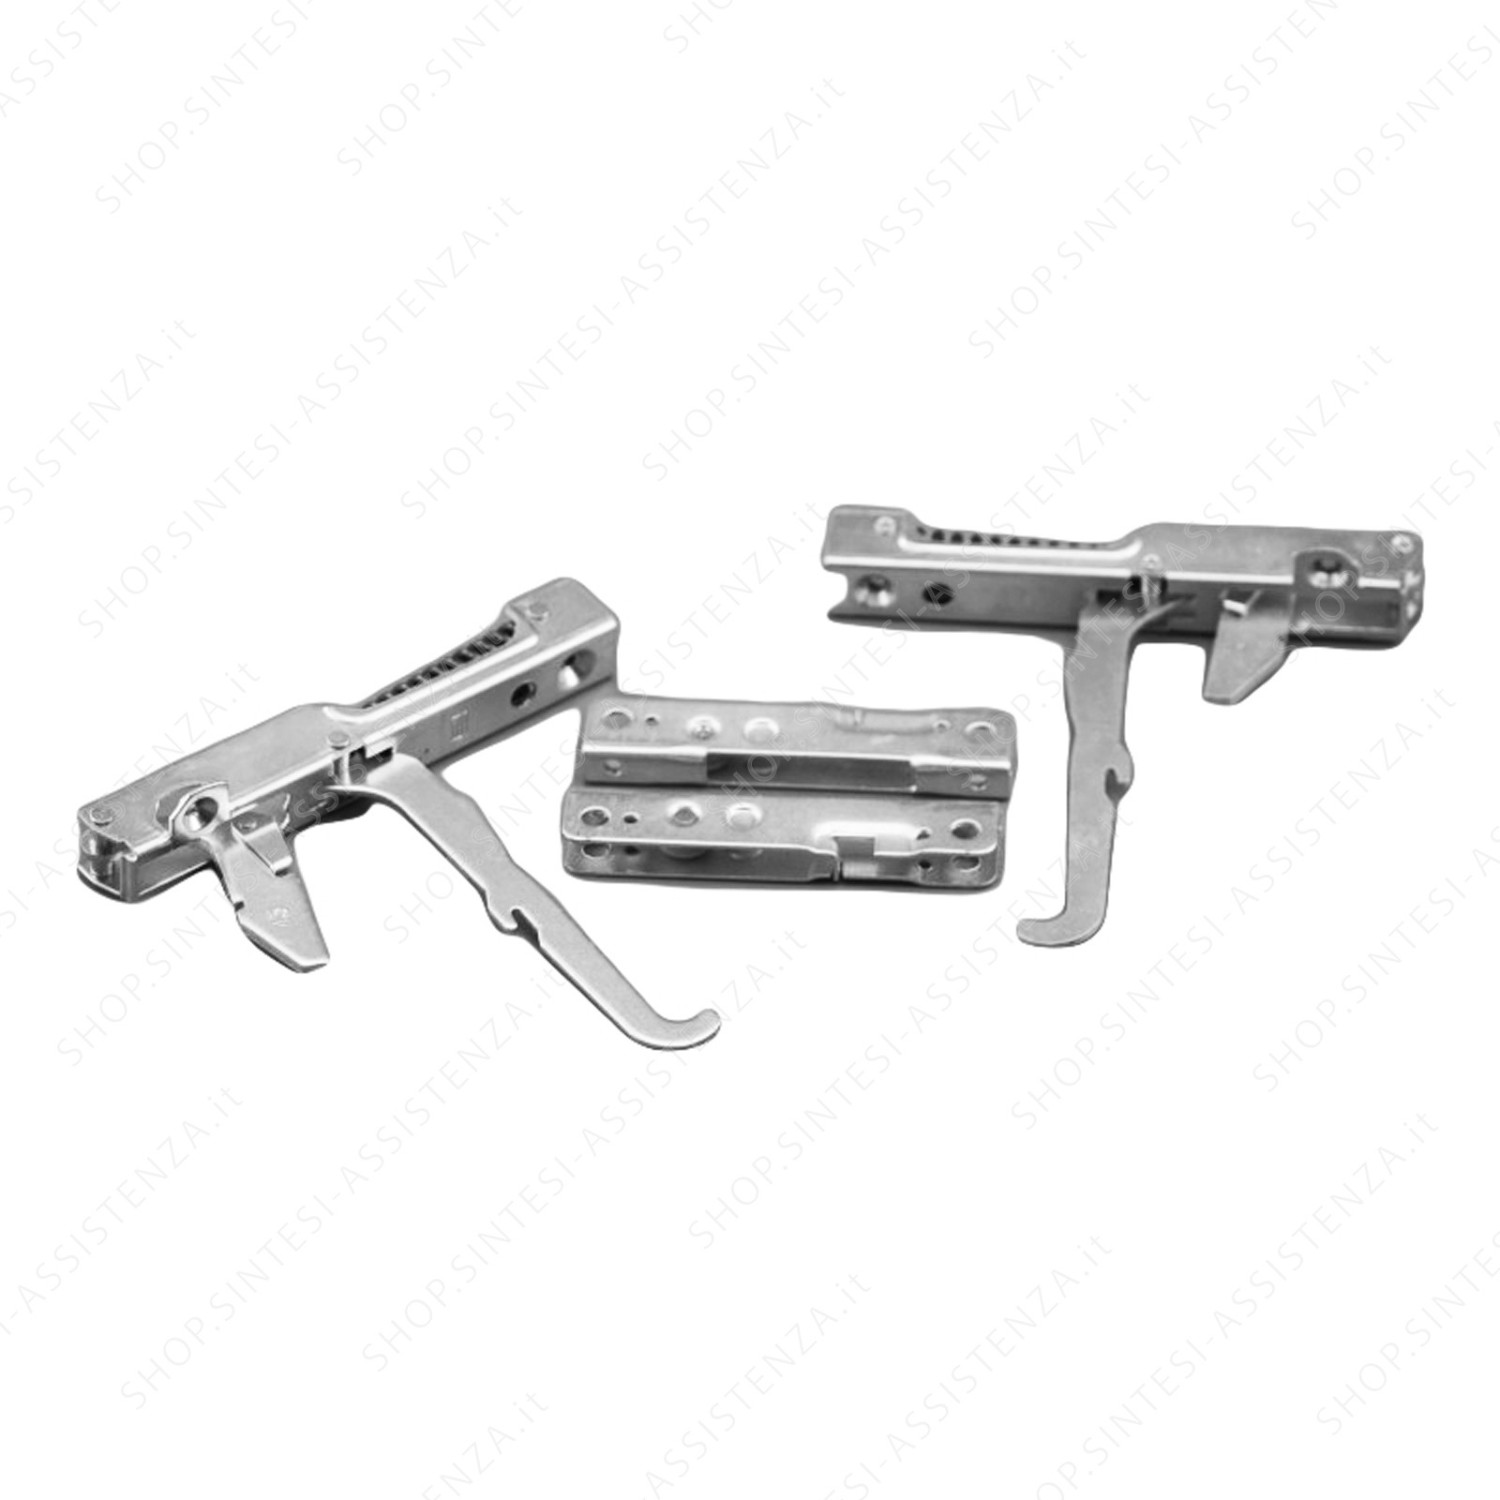 PAIR SMEG OVEN DOOR HINGES COMPLETE WITH ROLLERS SE ALFA S WH - 691330361